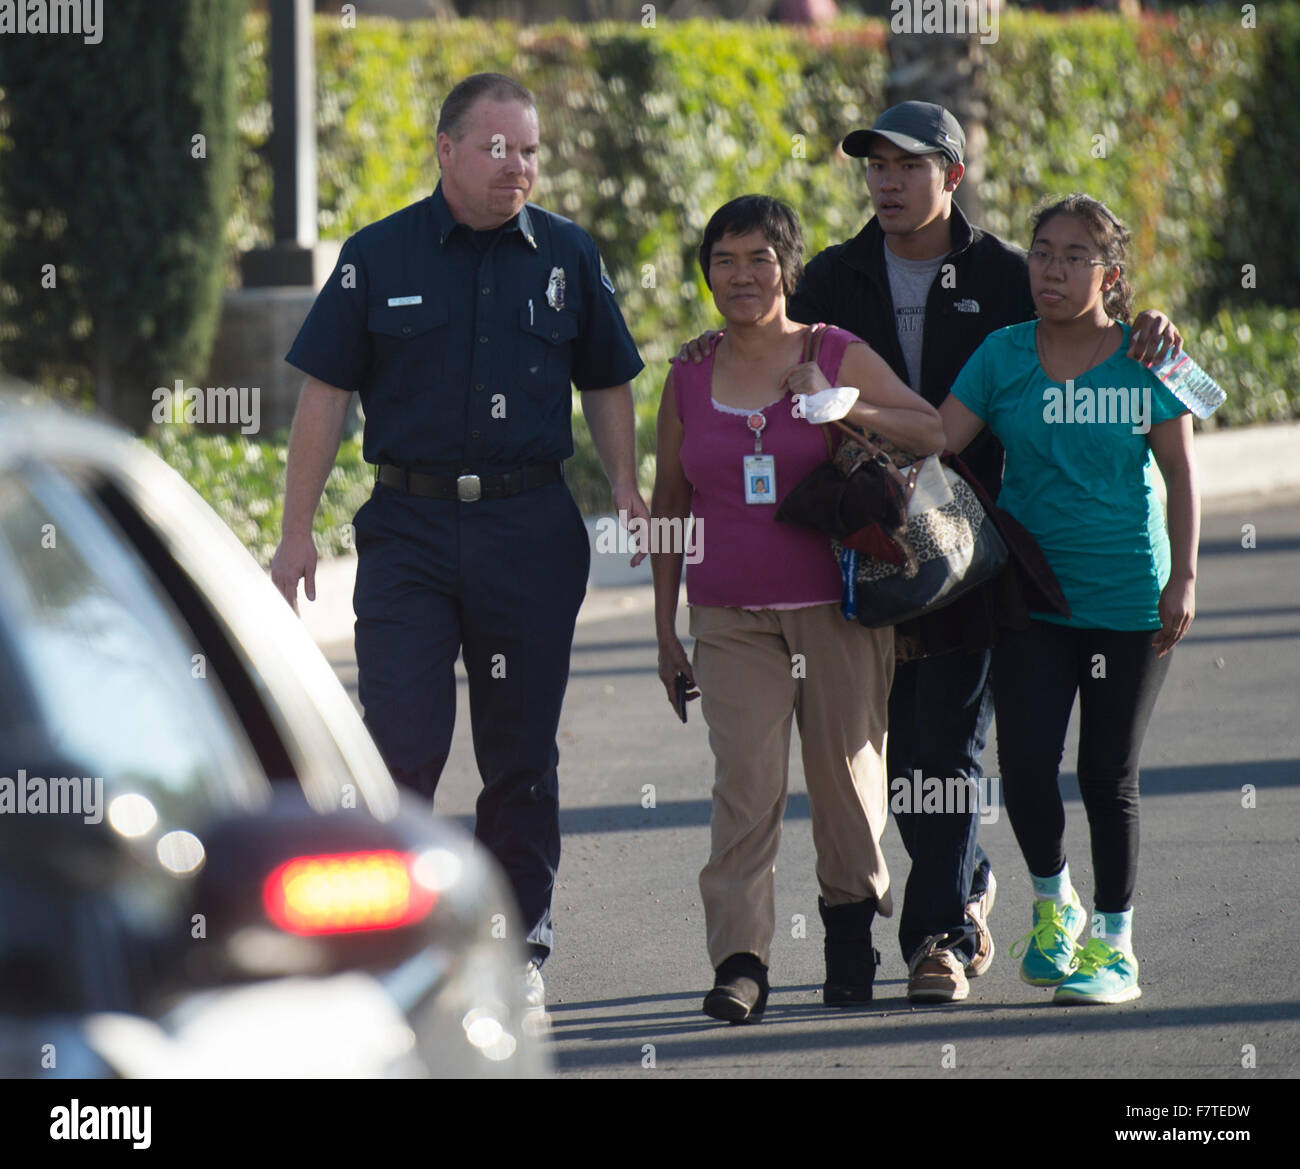 Los Angeles, USA. 2nd Dec, 2015. A survivor (2nd L) of the mass shooting at the Inland Regional Center meets her family after police questioning in San Bernardino City of Southern California, the United States, Dec. 2, 2015. One suspect was gunned down and one in custody Wednesday afternoon after a shooting killed at least 14 people and injured 14 others in San Bernardino, local media reported. Credit:  Yang Lei/Xinhua/Alamy Live News Stock Photo